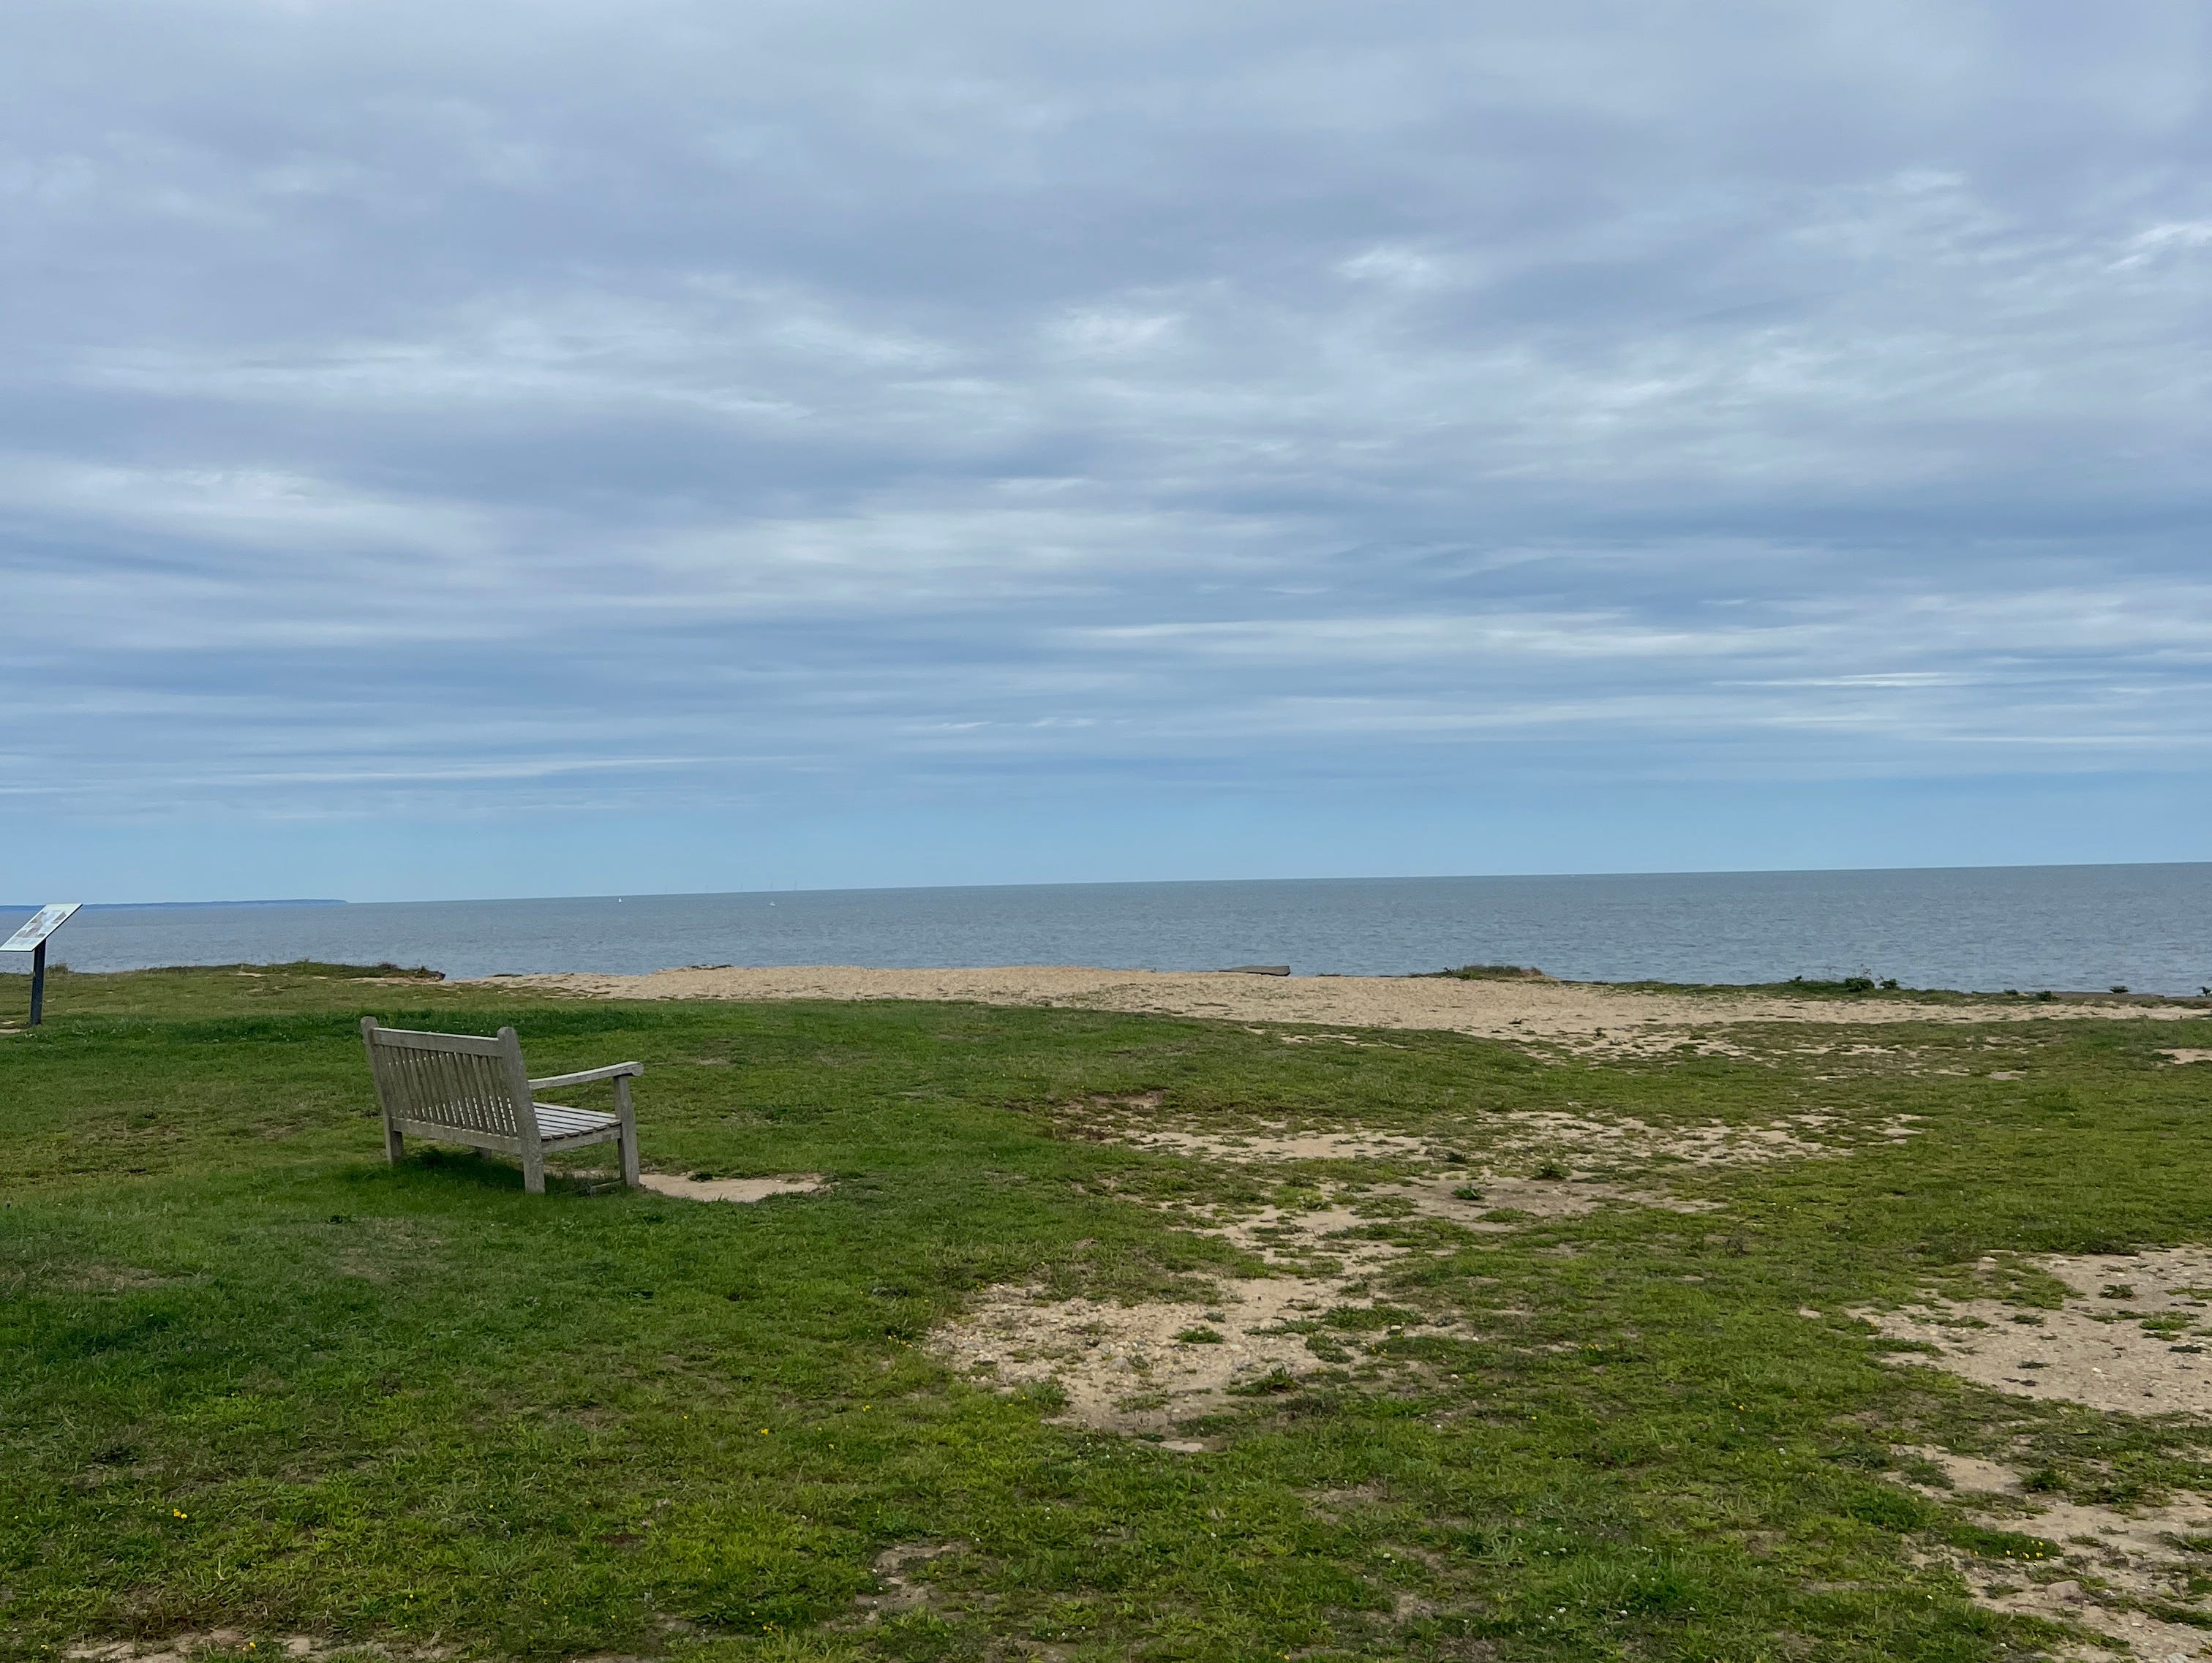 <p>There are a few parks in the Montauk area that give you a good look at the bluffs, including <a href="https://parks.ny.gov/parks/16">Shadmoor State Park.</a> <a href="https://parks.ny.gov/parks/61/details.aspx">Montauk Point State Park</a>, and <a href="https://ehamptonny.gov/803/Ditch-Plains-Beach">Ditch Plains Beach</a>.</p>